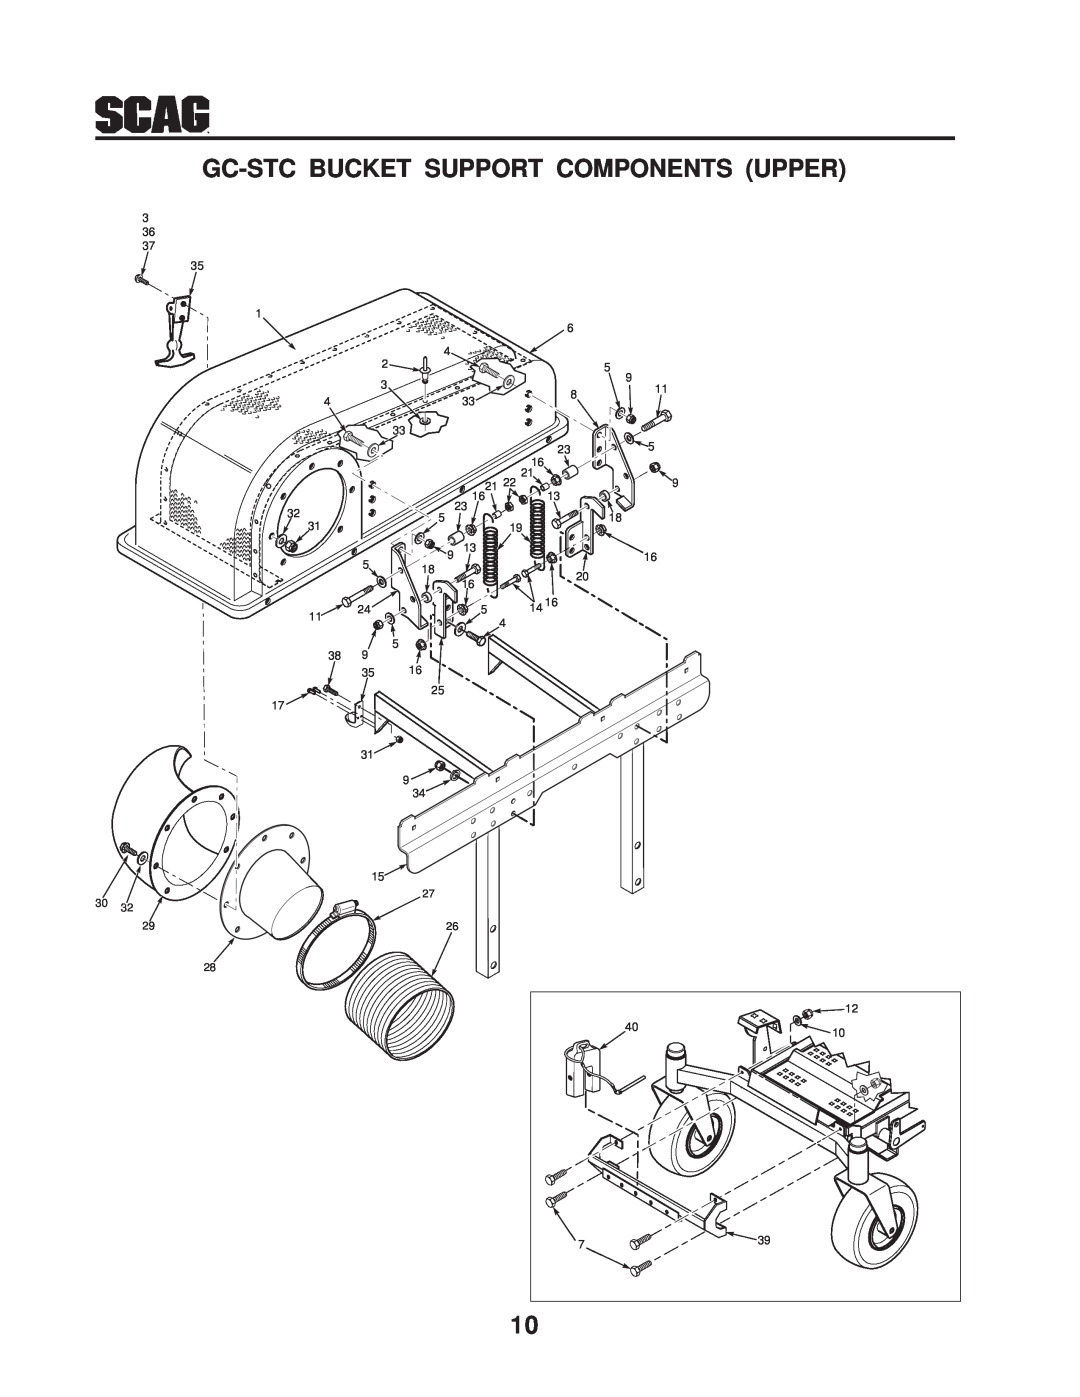 Scag Power Equipment GC-STC manual Gc-Stc Bucket Support Components Upper 